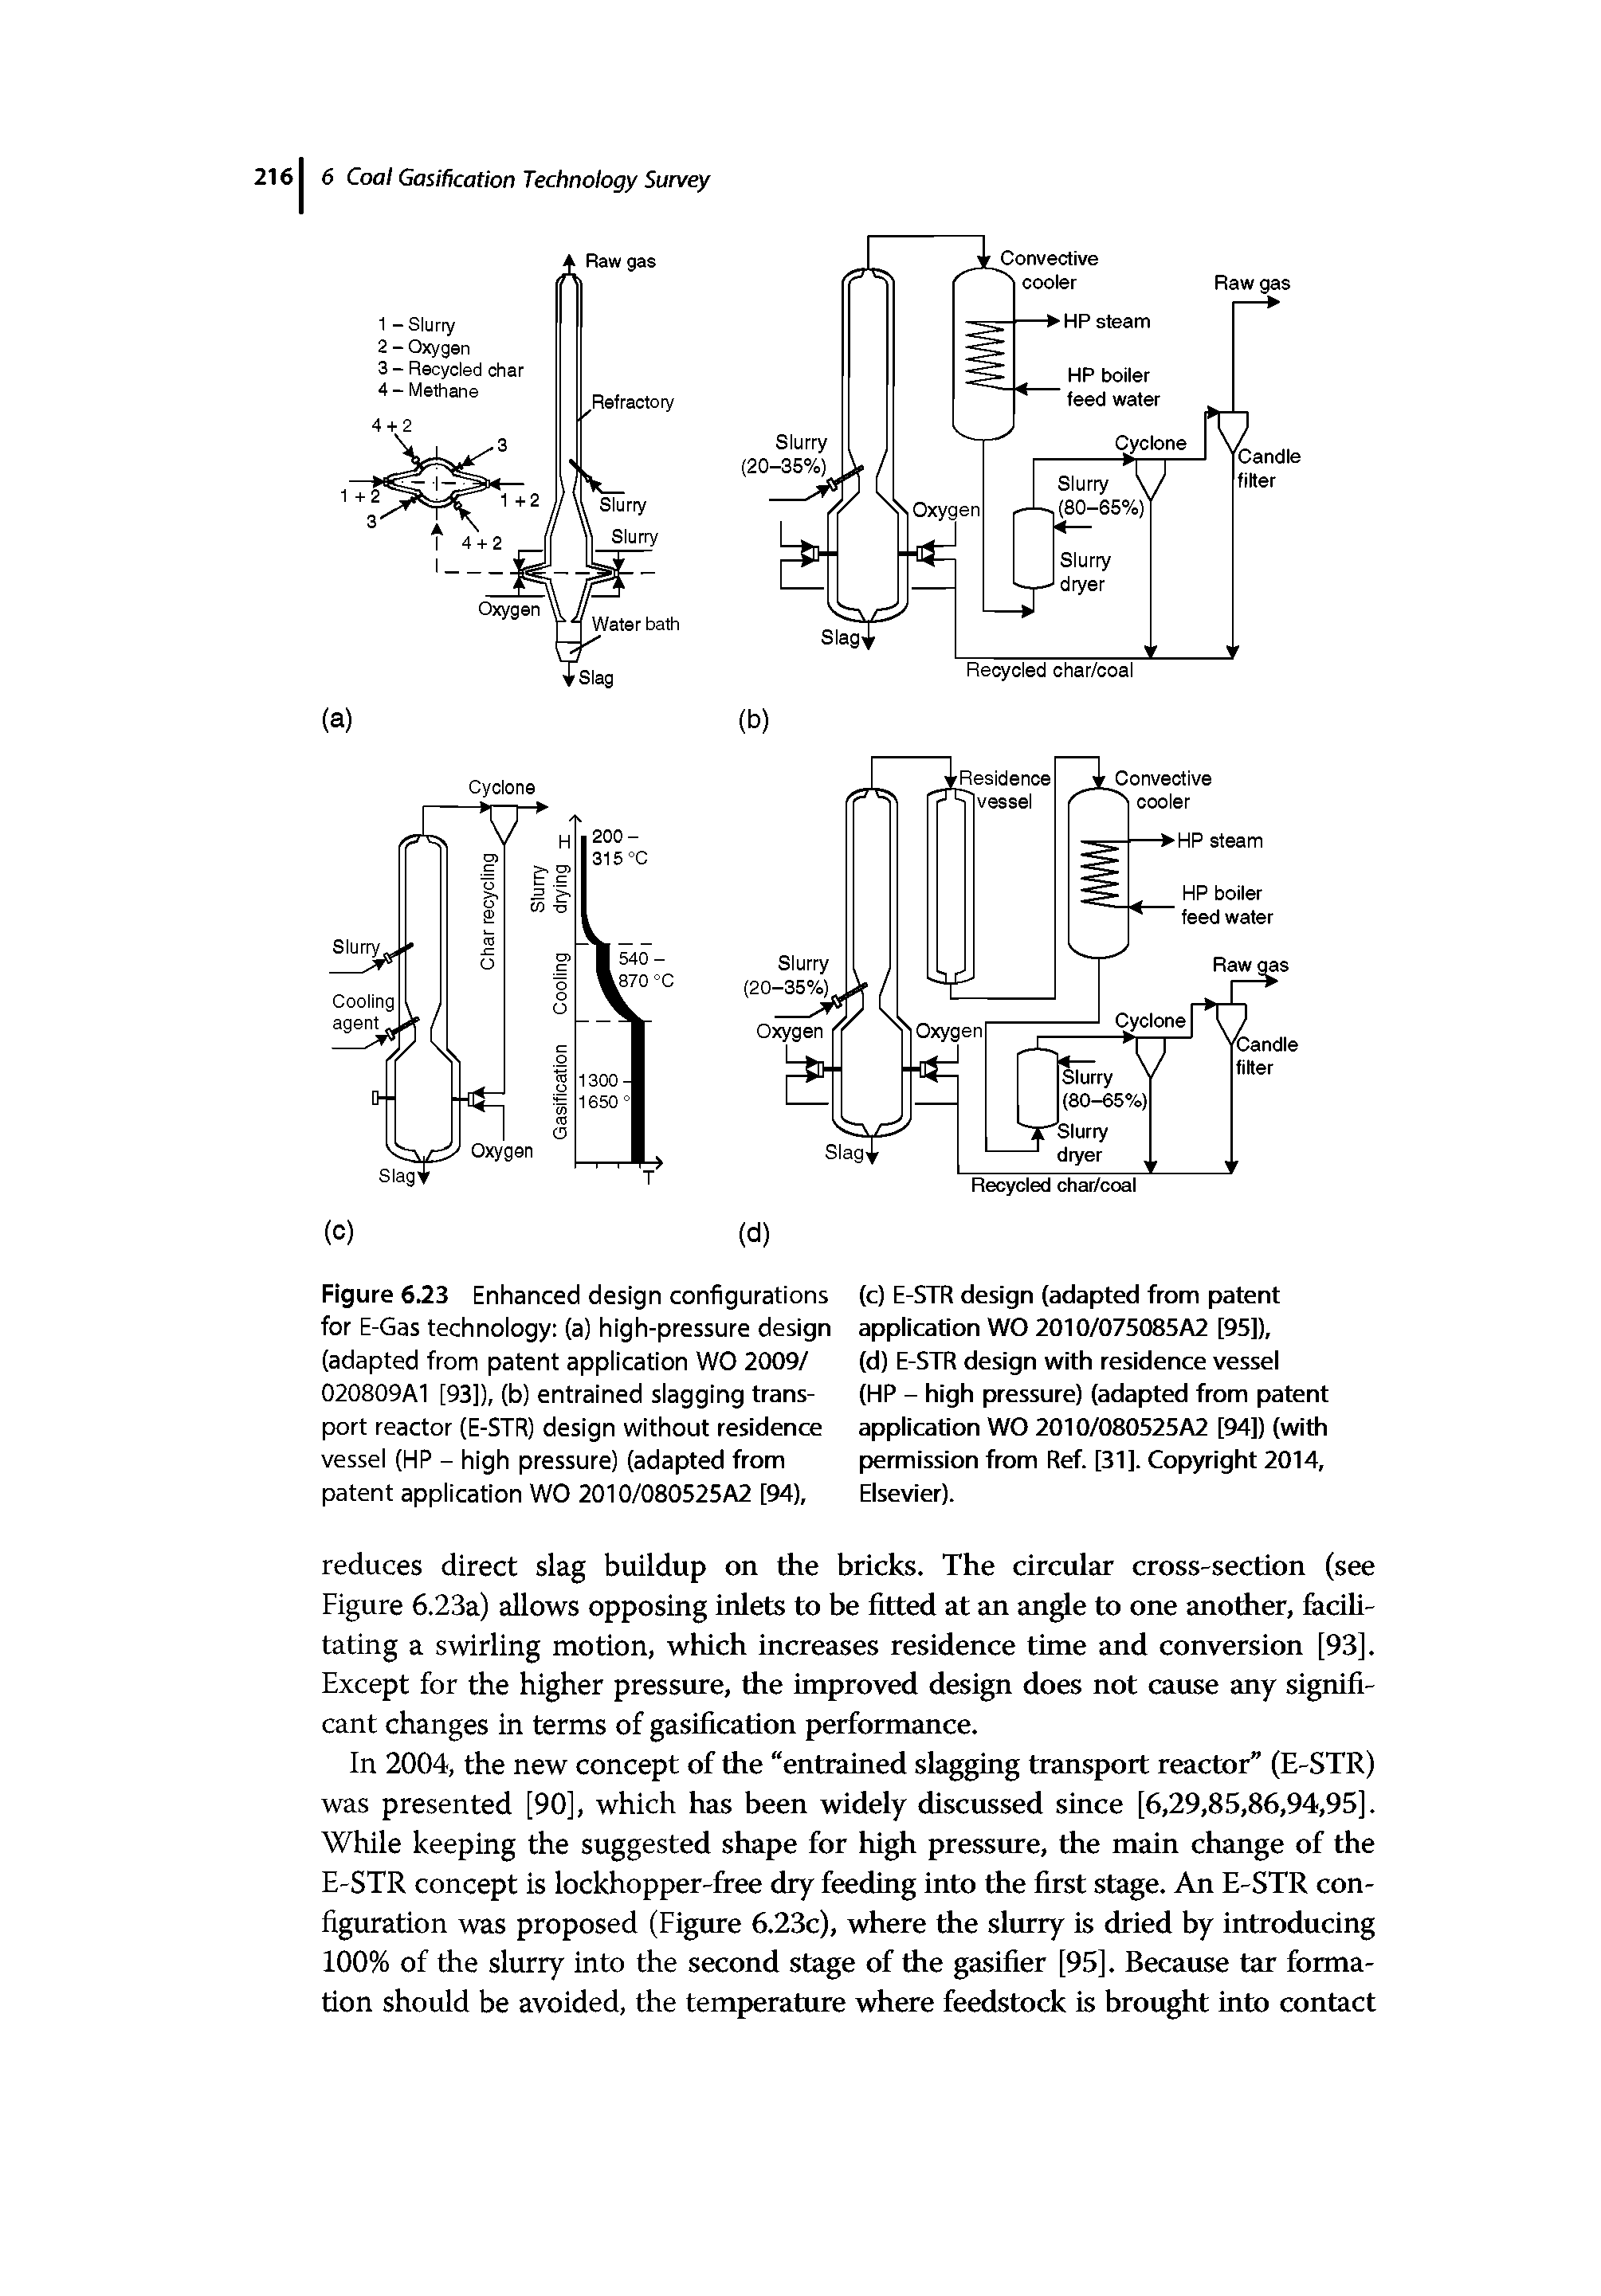 Figure 623 Enhanced design configurations for E-Gas technology (a) high-pressure design (adapted from patent application WO 2009/ 020809A1 [93]), (b) entrained slagging transport reactor (E-STR) design without residence vessel (HP - high pressure) (adapted from patent application WO 2010/080525A2 [94),...